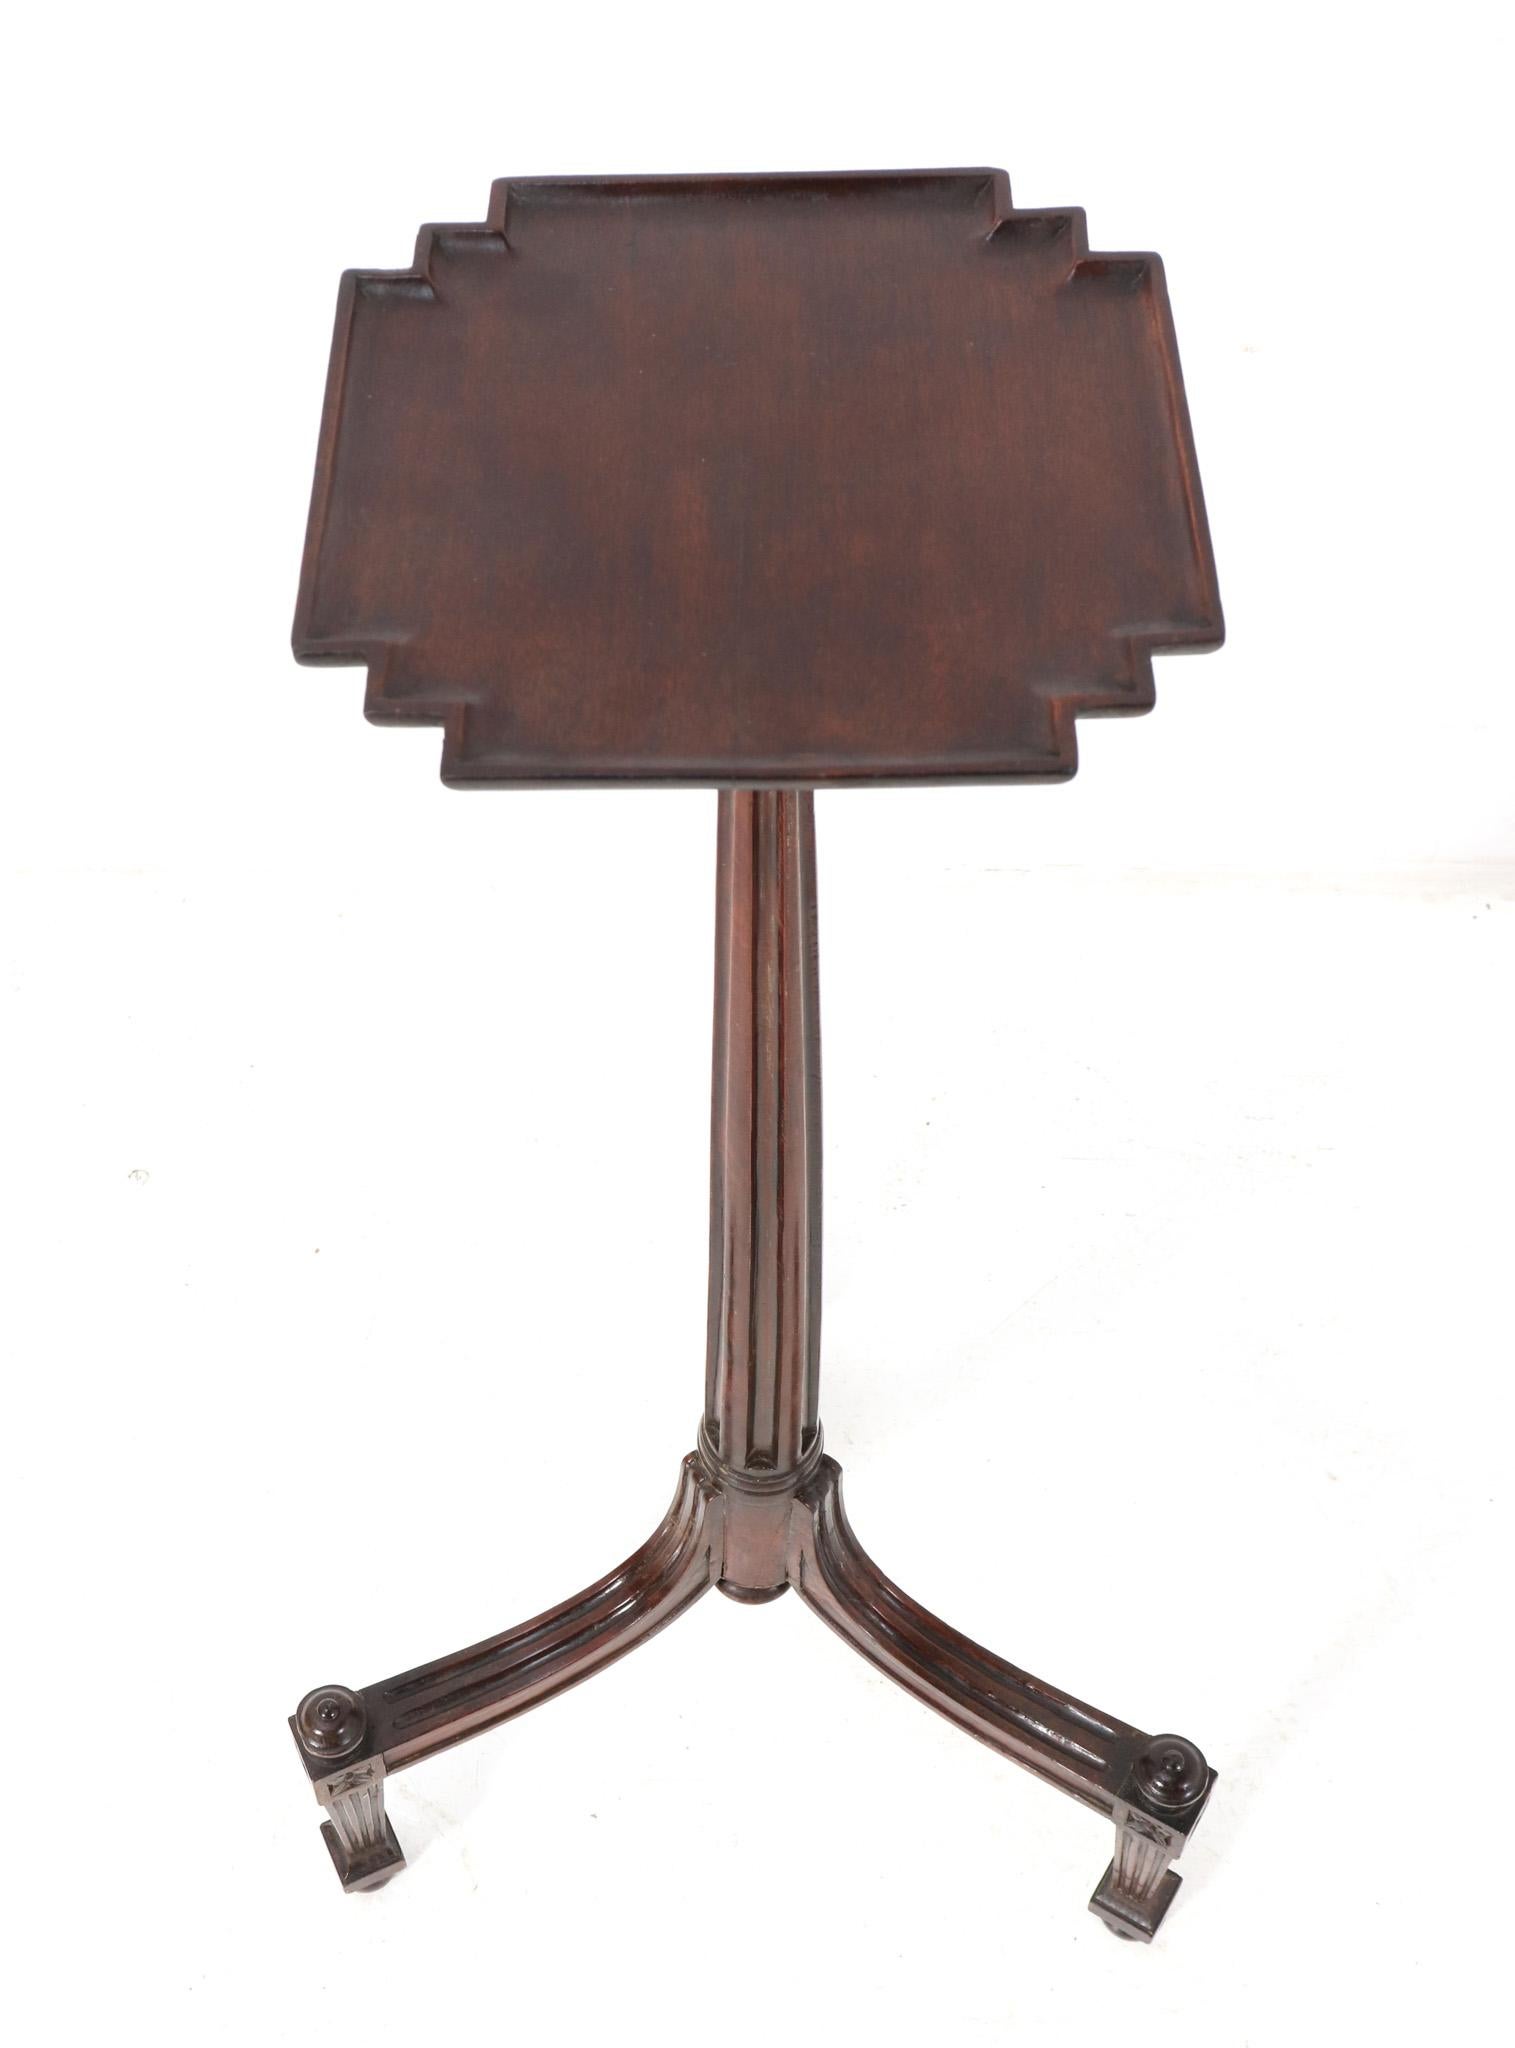 Stunning and elegant Louis XVI Style side table or plant stand.
Striking Dutch design from the 1900s.
Solid walnut tripod base with original solid walnut top.
Measurements top diameter: 22.5 cm or 8.86 in.
This wonderful Louis XVI style side